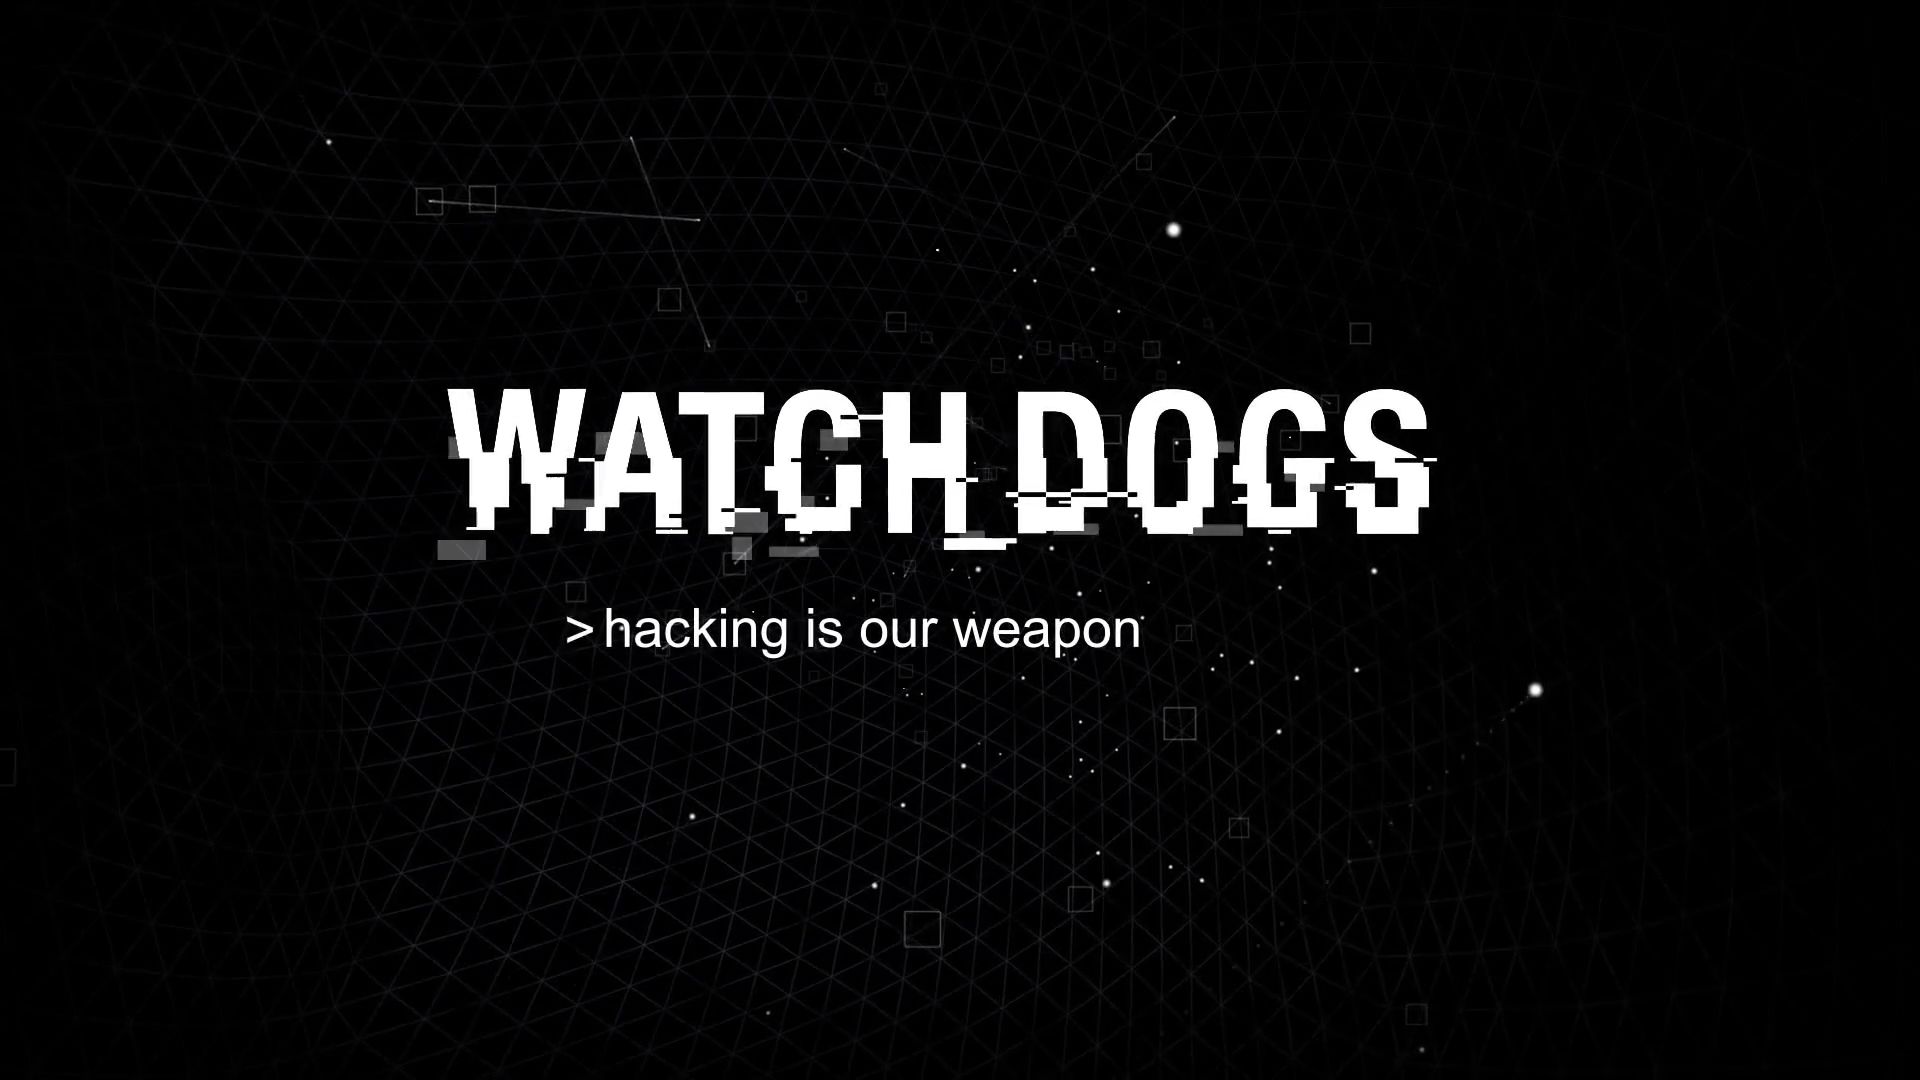 video game, watch dogs, hacking is our weapon